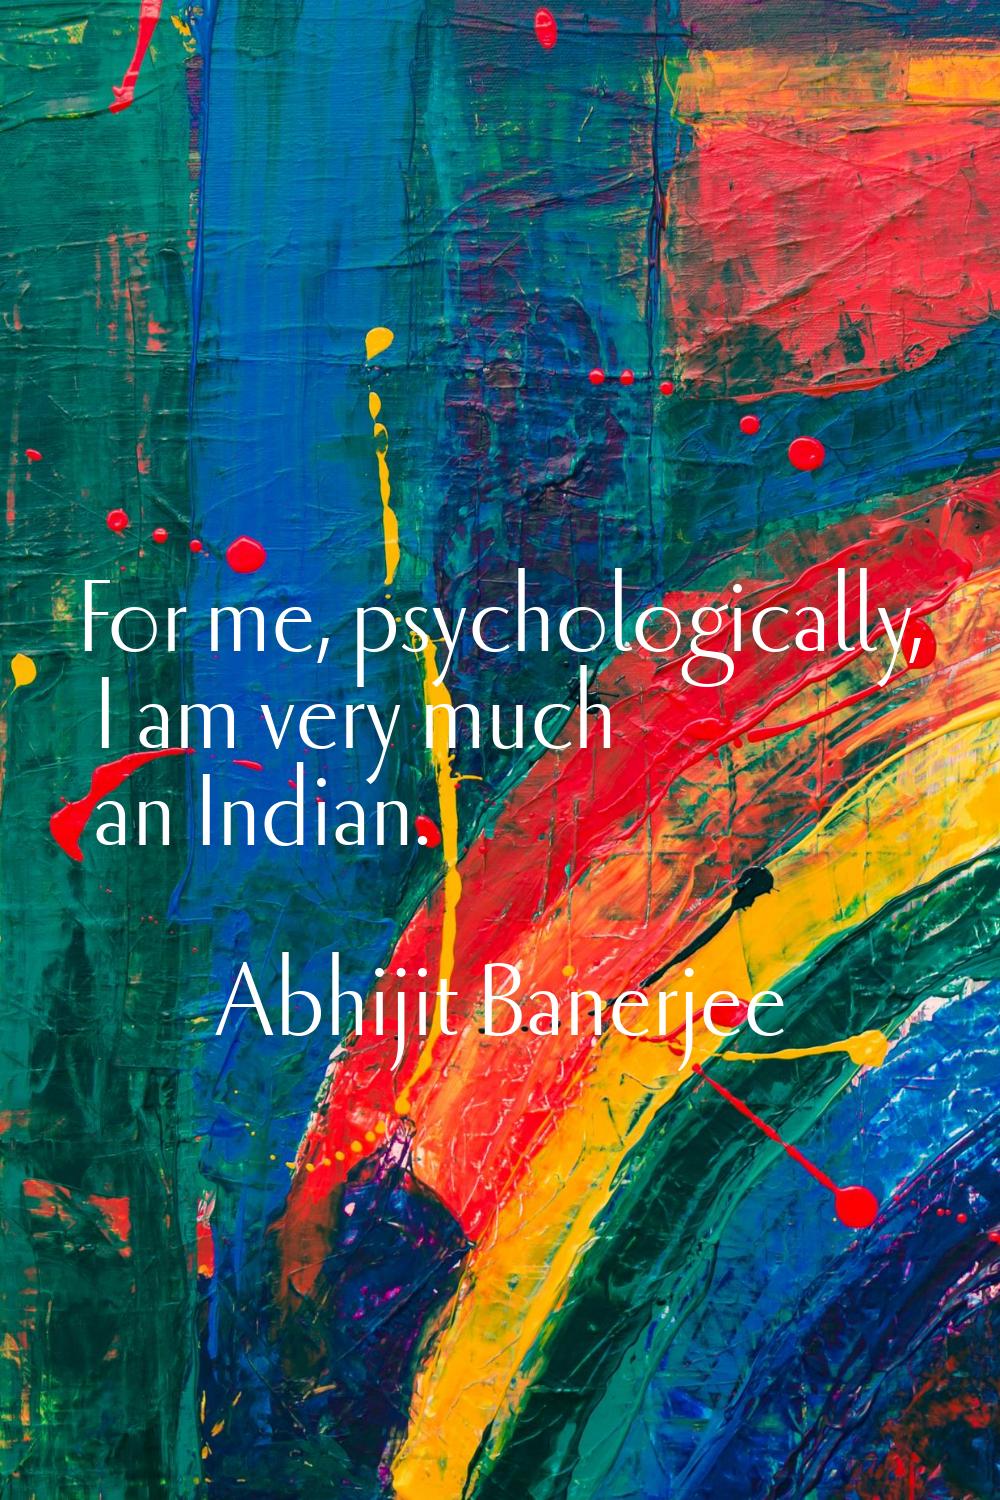 For me, psychologically, I am very much an Indian.